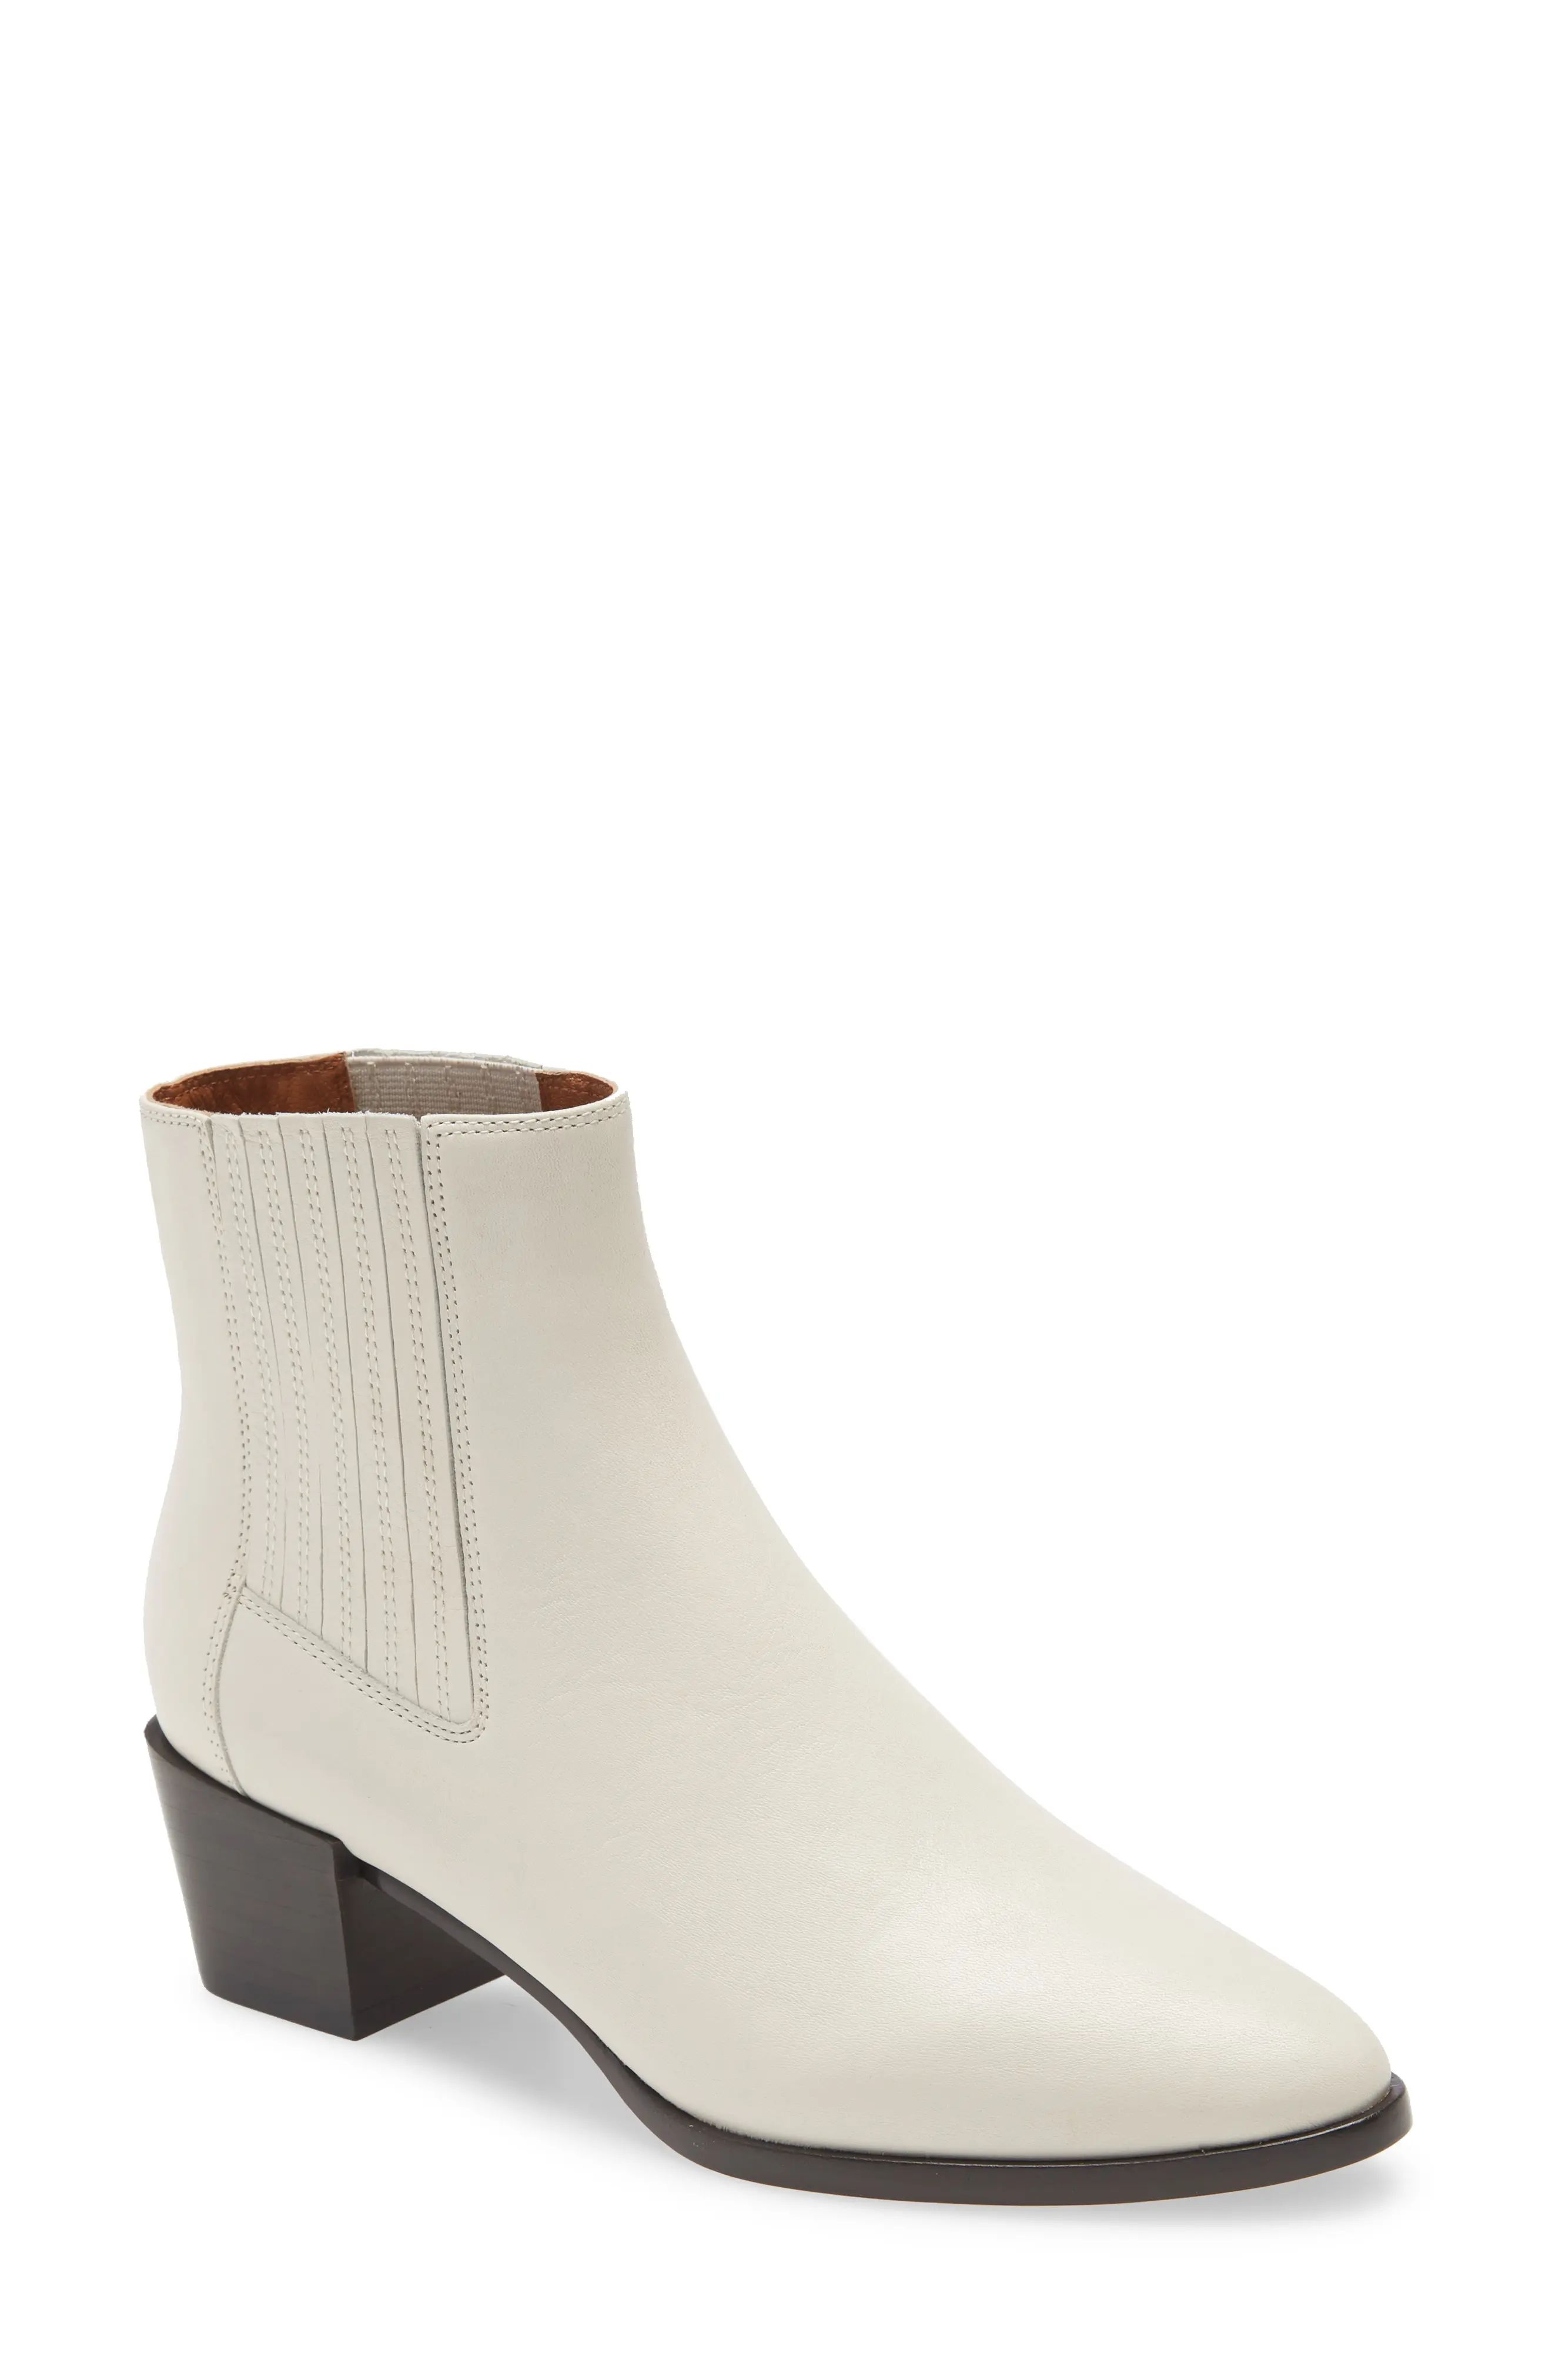 rag & bone Rover Chelsea Boot in Antique White at Nordstrom, Size 9.5Us | Nordstrom